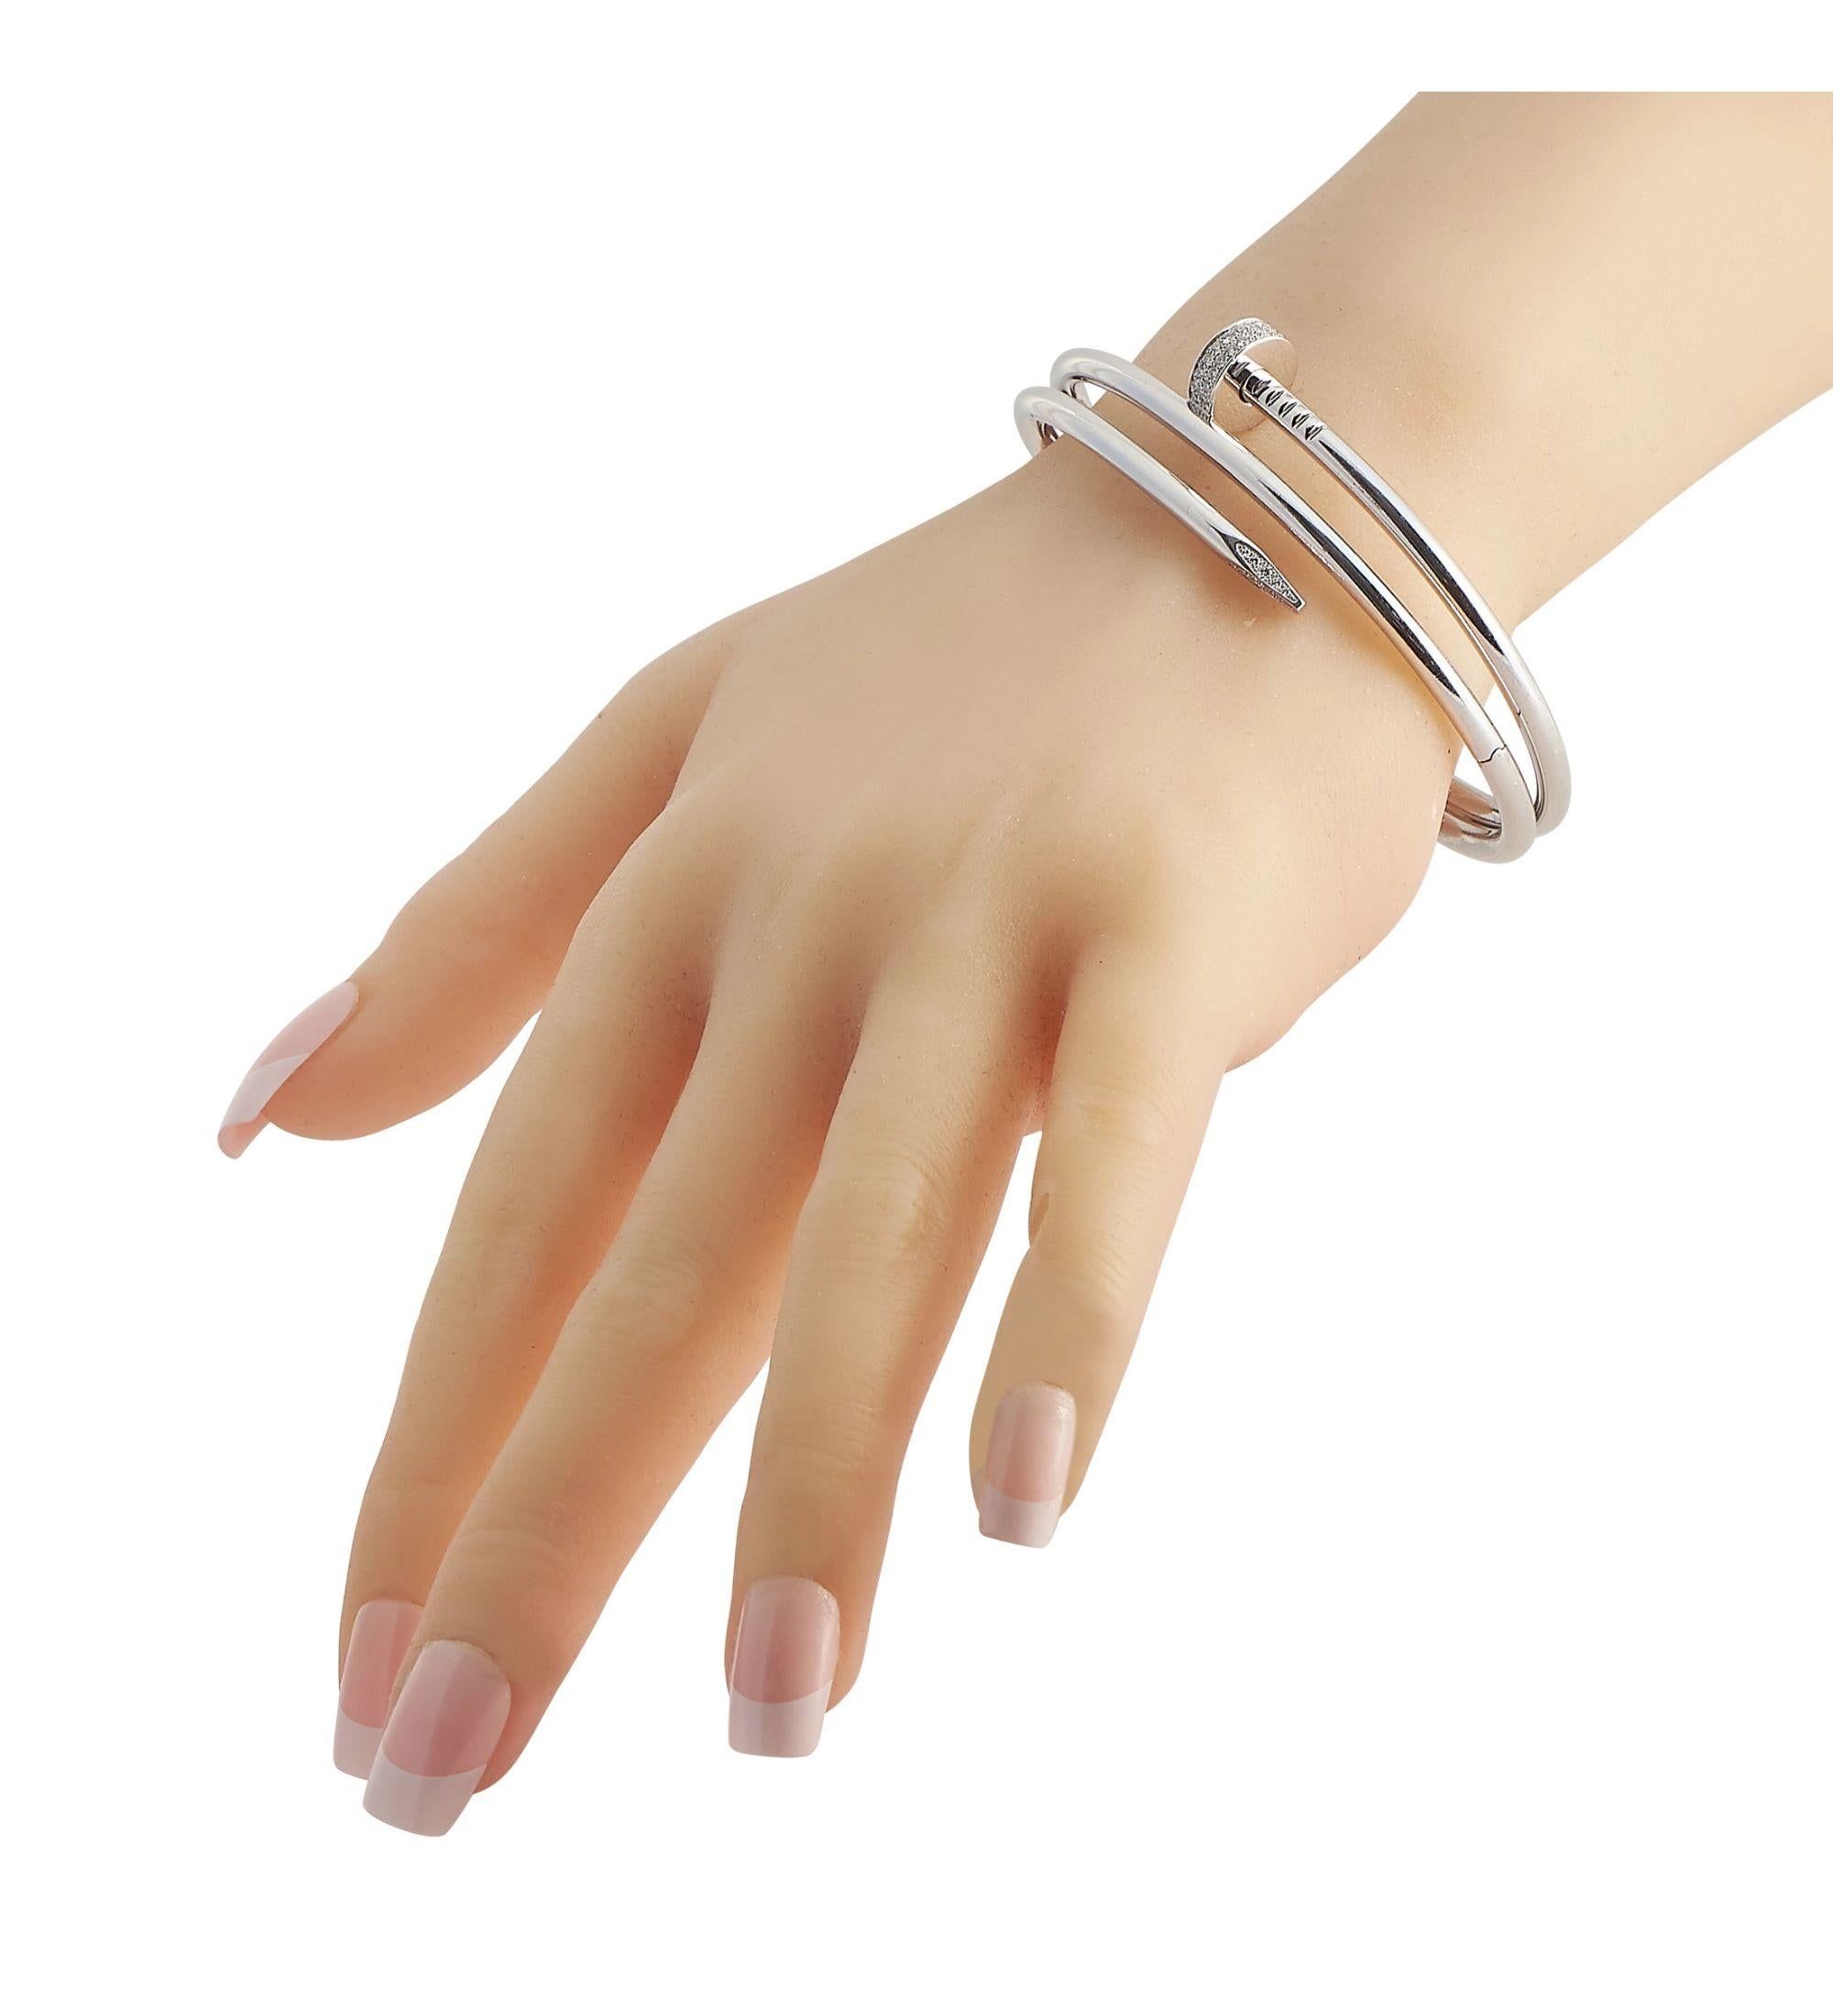 An elegant accessory to help you nail all fashion trends gracefully. This Cartier Juste un Clou Bracelet is crafted in 18K white gold and features a double coil design in the iconic nail motif. The nail-inspired bracelet's head and tip are pave set